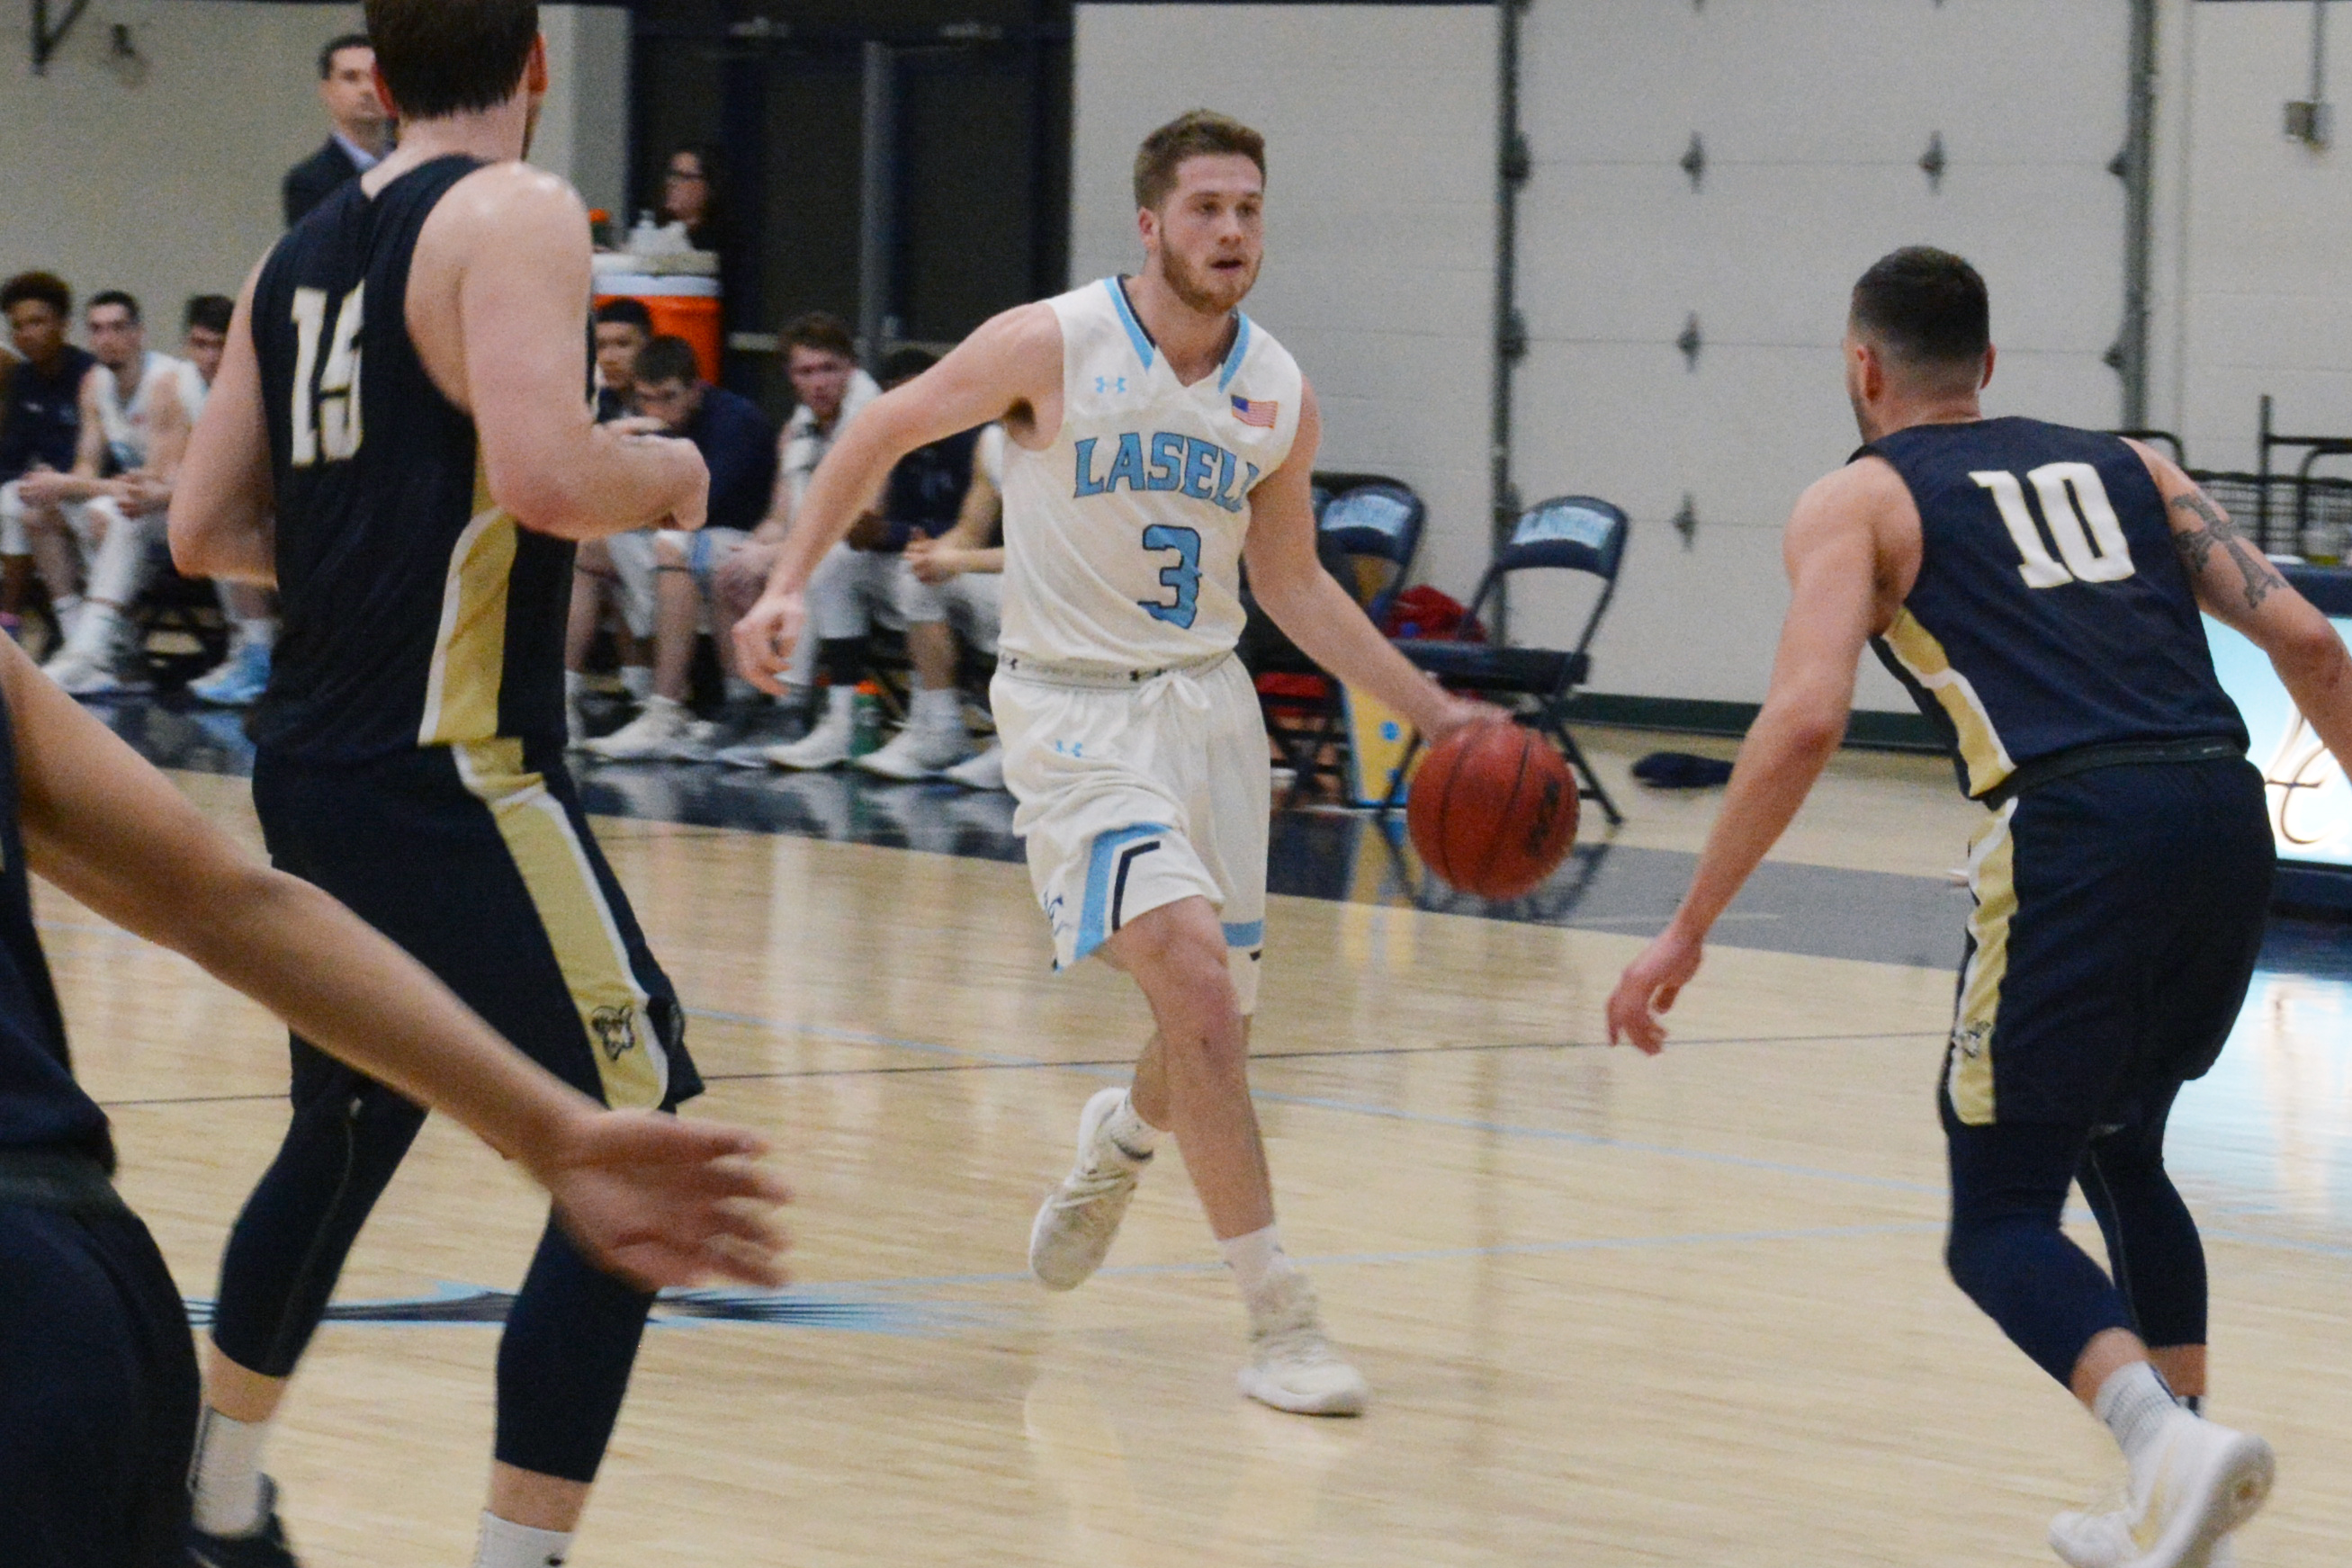 Lasell Men’s Basketball drops home game to Suffolk